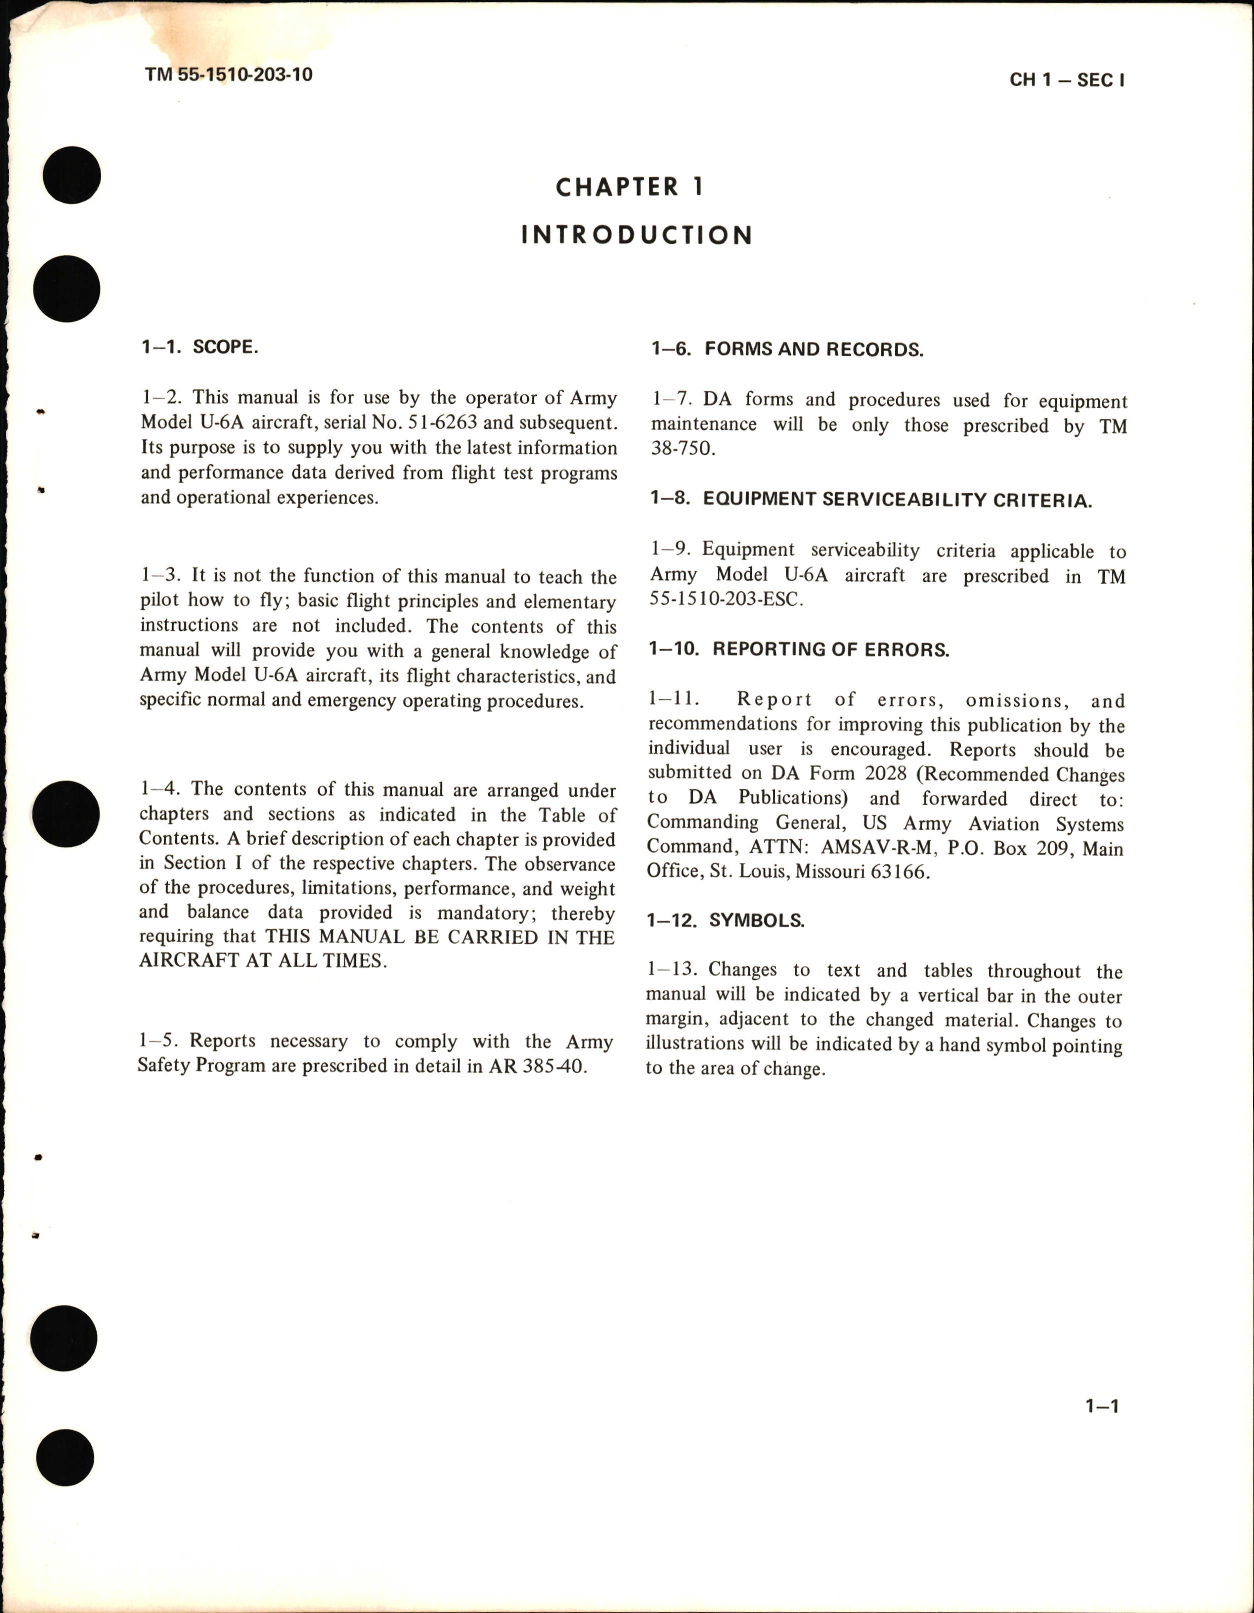 Sample page 5 from AirCorps Library document: Operators Manual for U-6A 